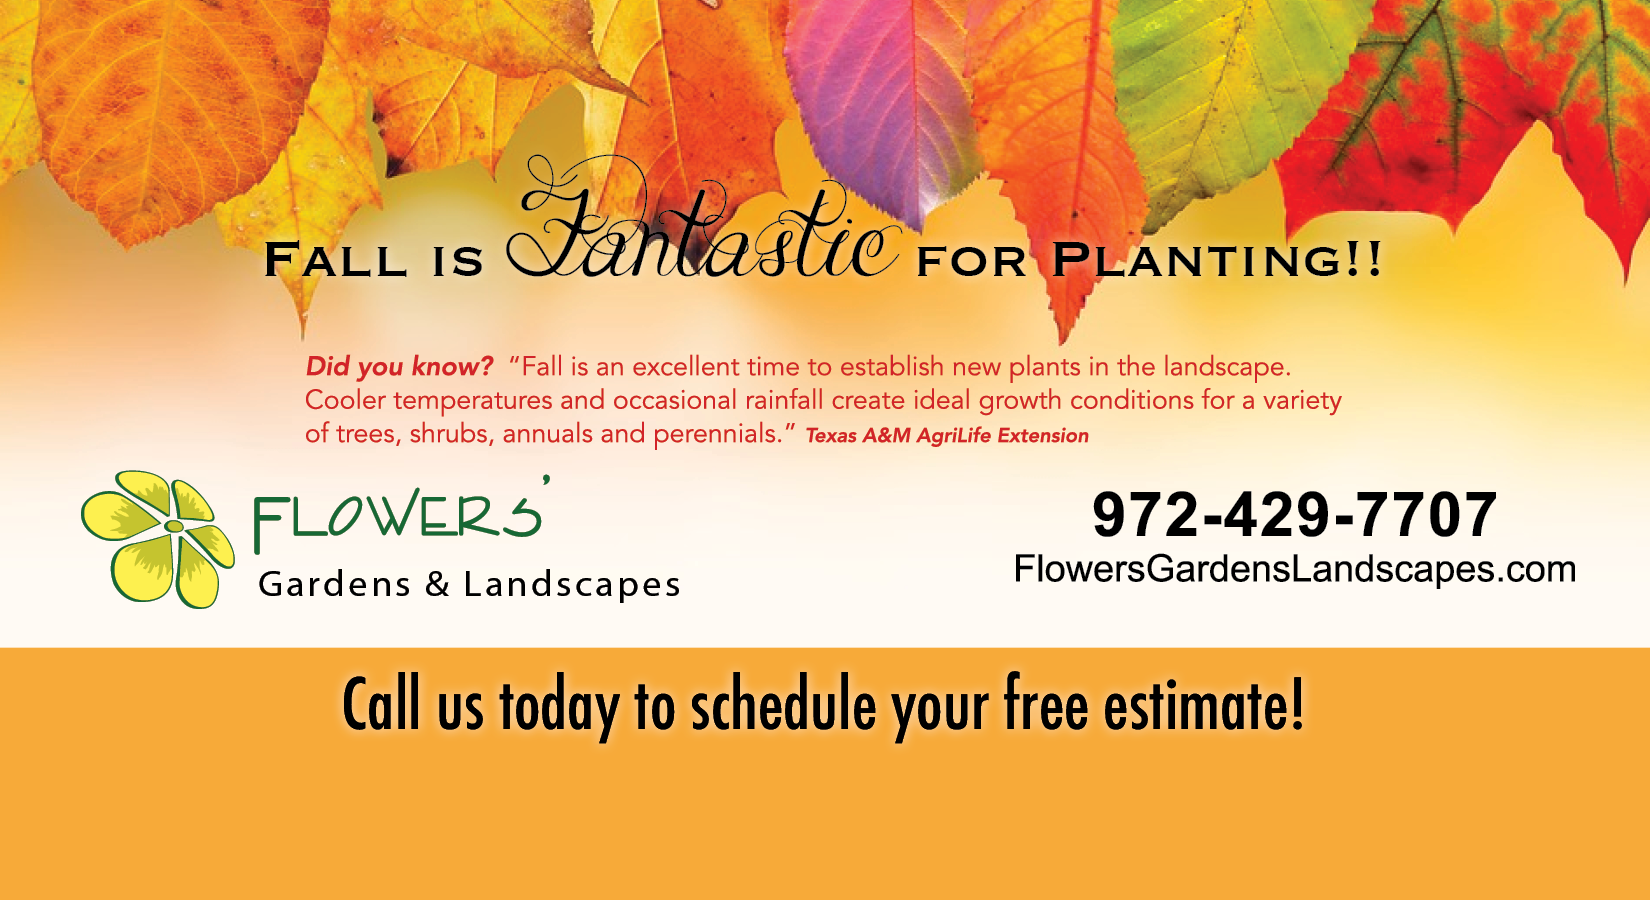 Fall is Fantastic for Planting!